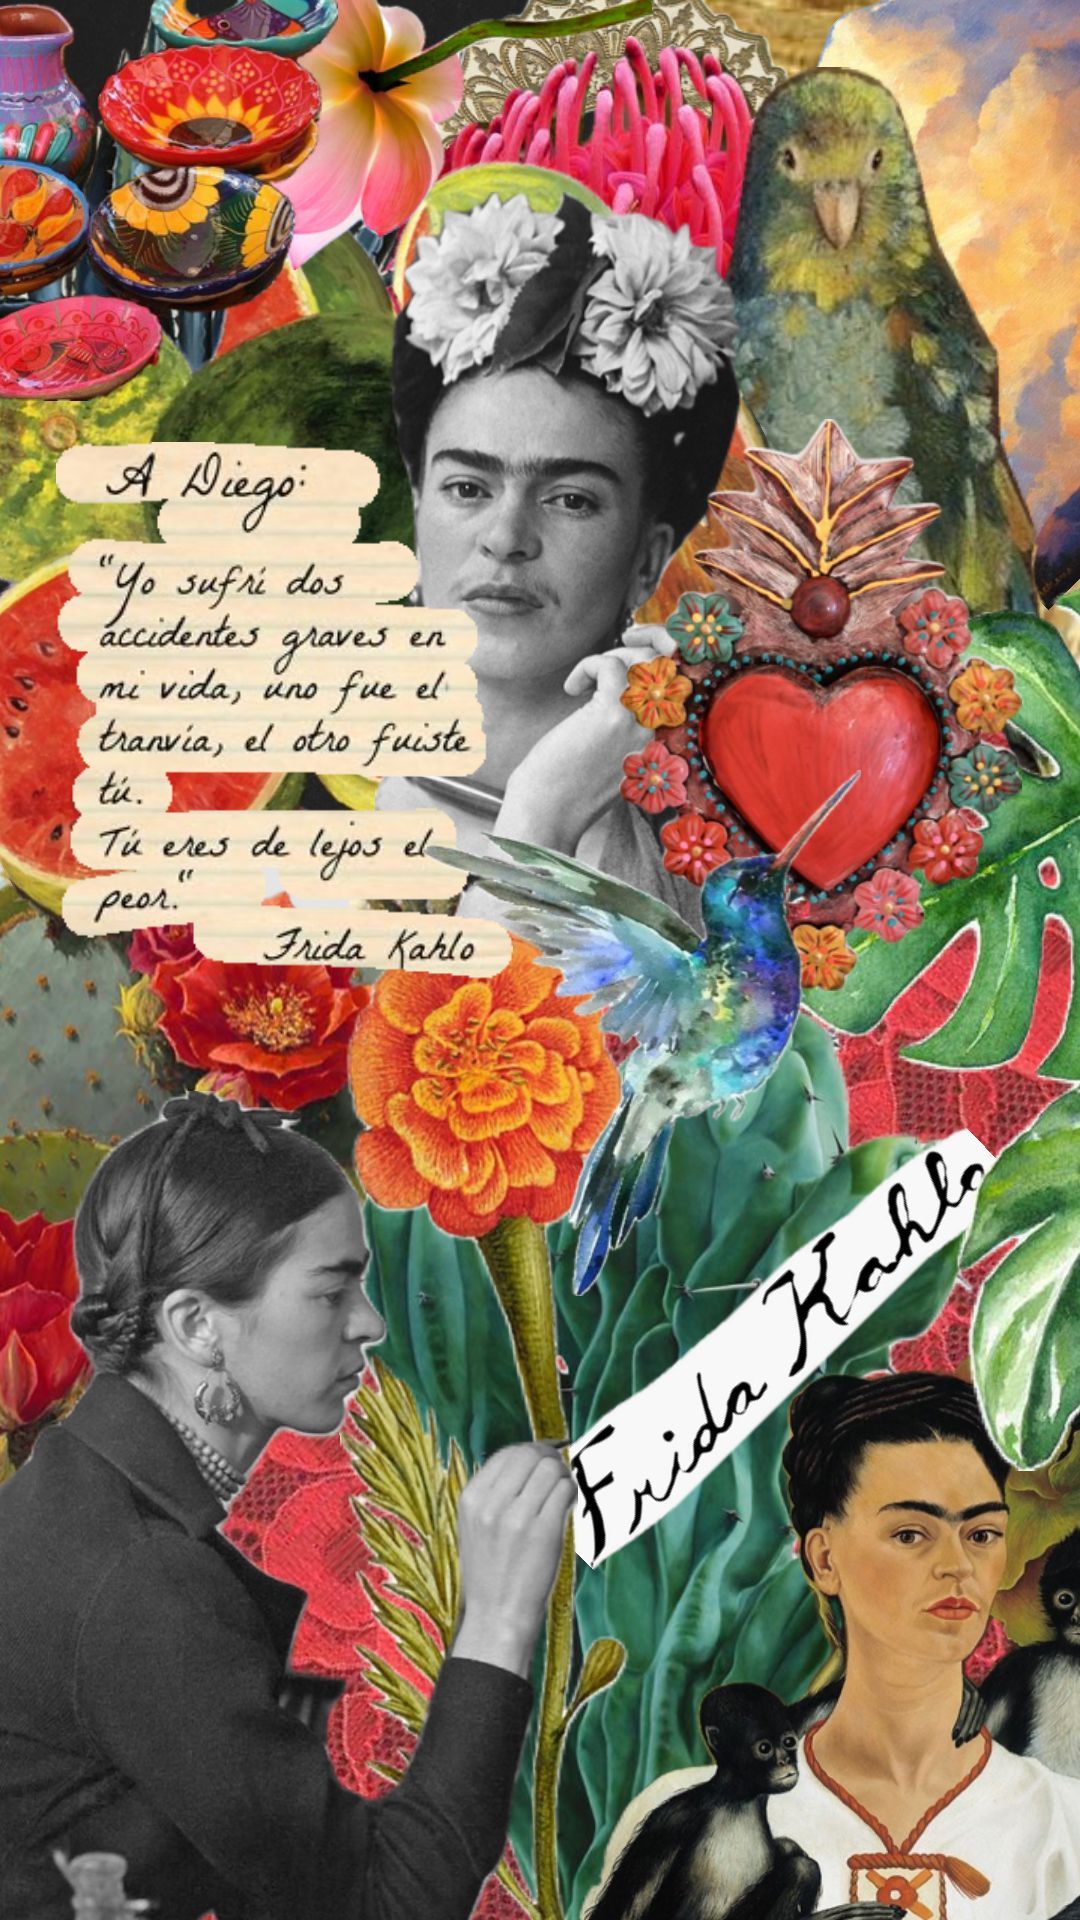 A collage of Frida Kahlo surrounded by flowers and birds. - Frida Kahlo